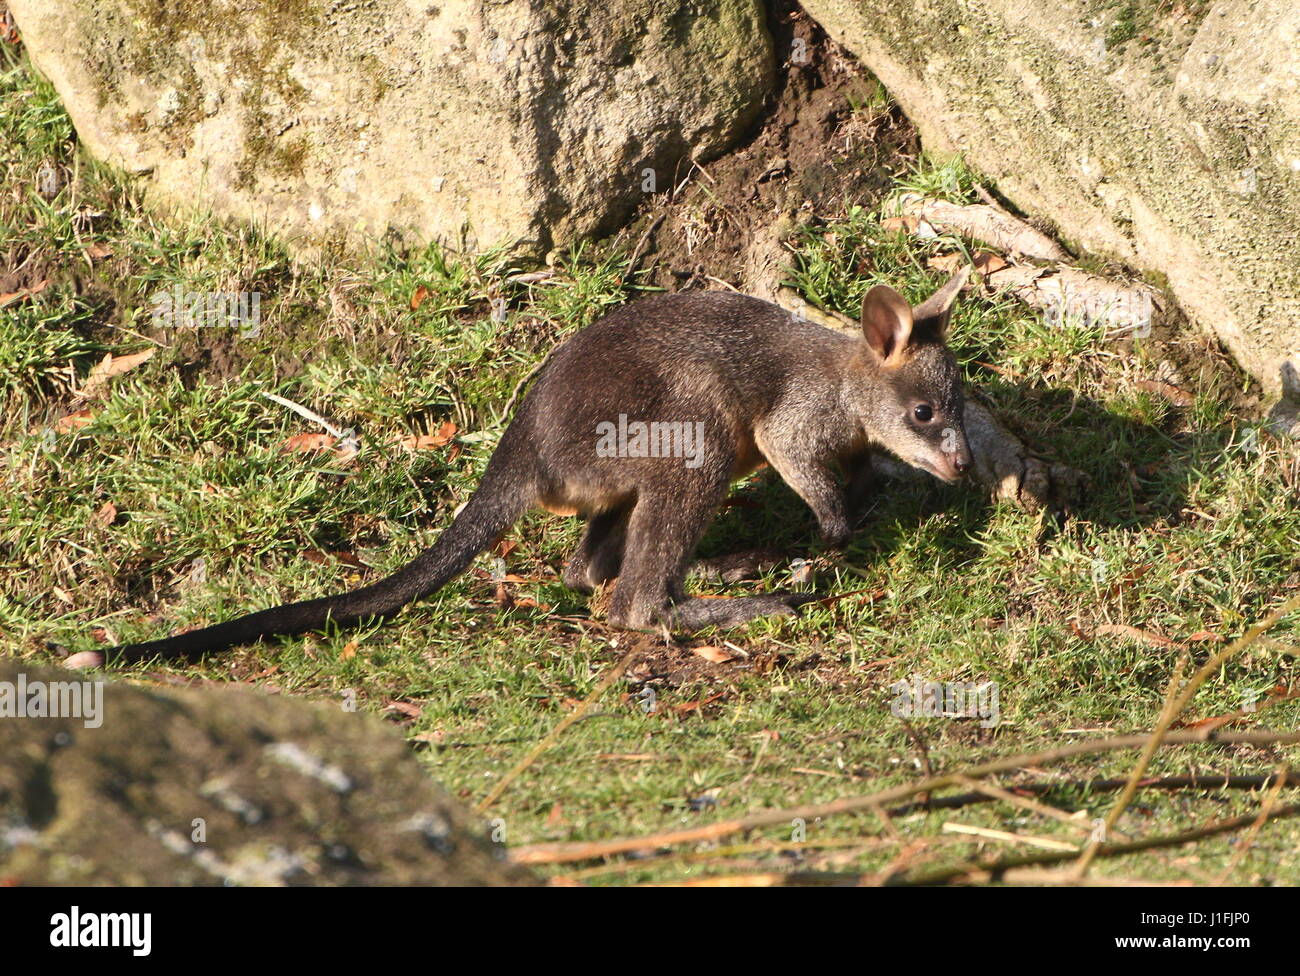 East Australian Swamp Wallaby joey (Wallabia bicolor), also Black Pademelon or Black-tailed Wallaby Stock Photo